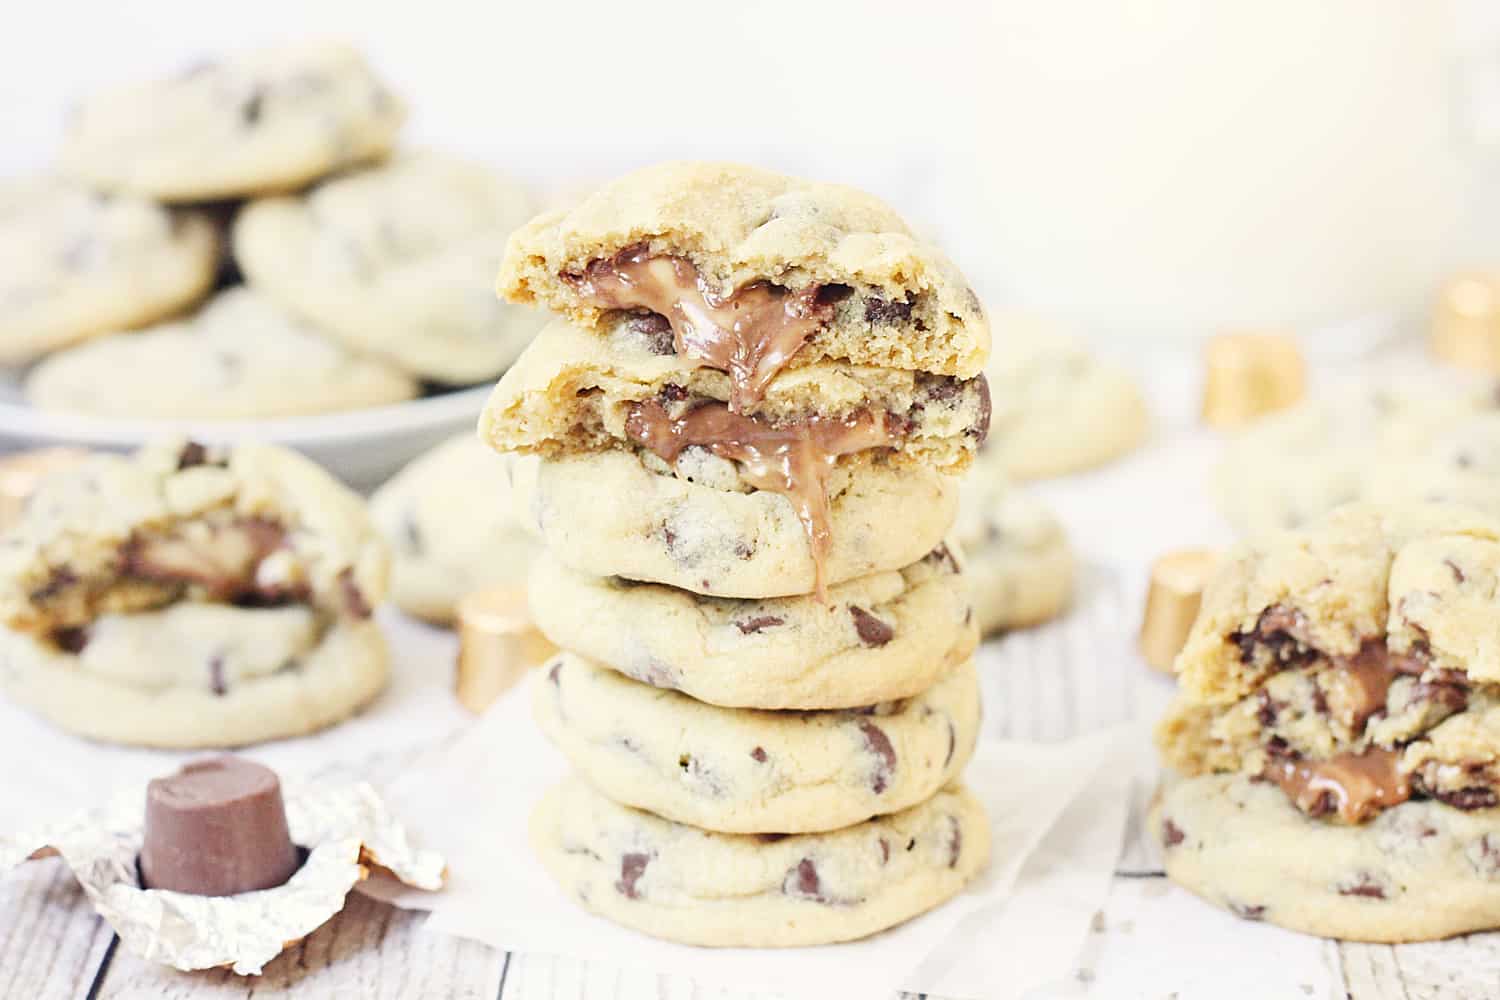 Chocolate Chip Rolo Cookies - Chocolate chip Rolo cookies feature a soft, chewy chocolate chip cookie filled with an ooey, gooey Rolo center. These Rolo cookies will make you rethink the classic recipe! #cookies #halfscratched #rolo #rolocookies #dessert #easyrecipe #cookierecipe #chocolate #cookiedough #baking